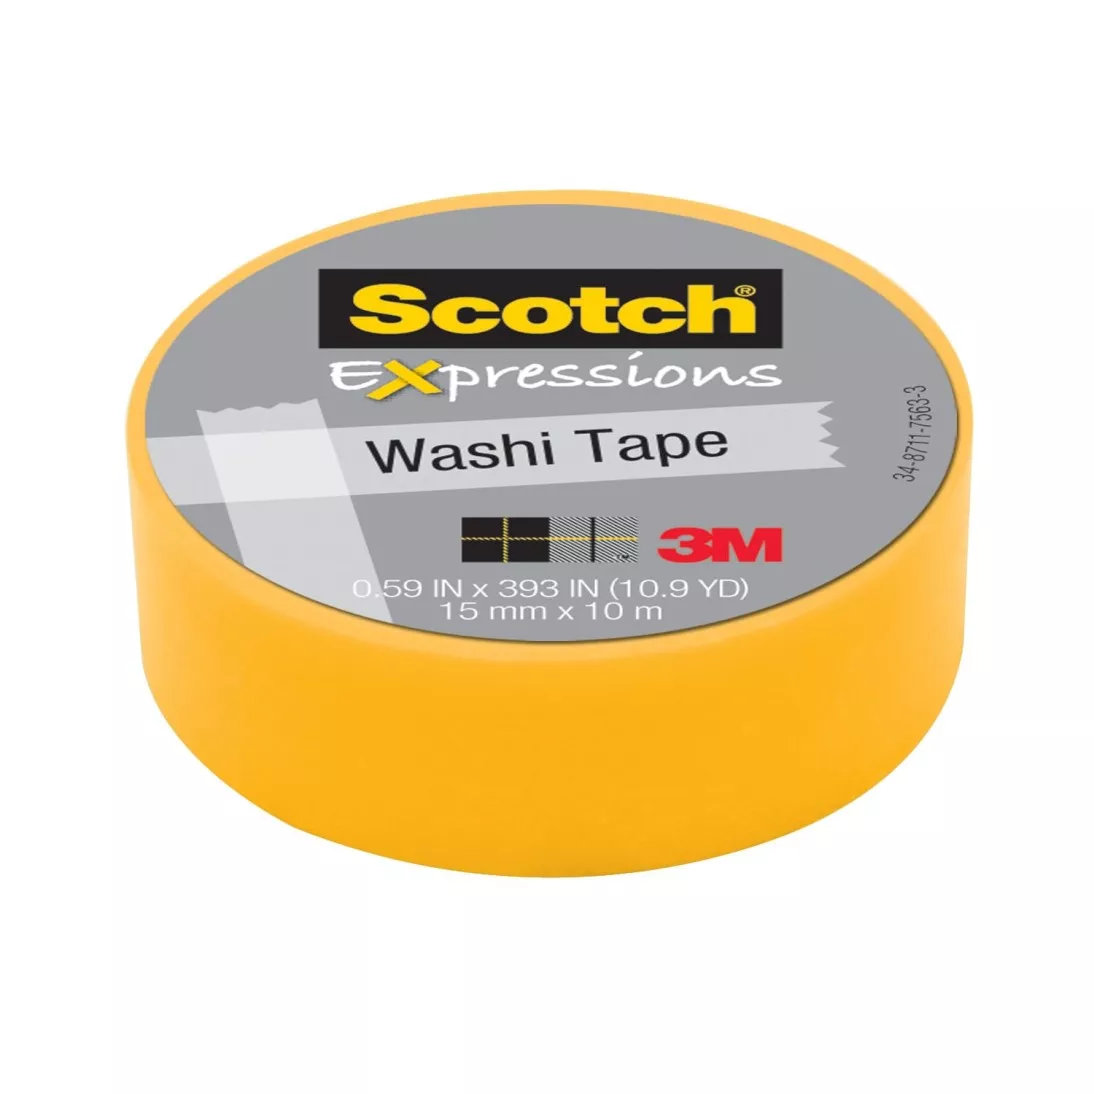 Scotch® Expressions Washi Tape C314-YEL, .59 in x 393 in (15 mm x 10 m)
Yellow